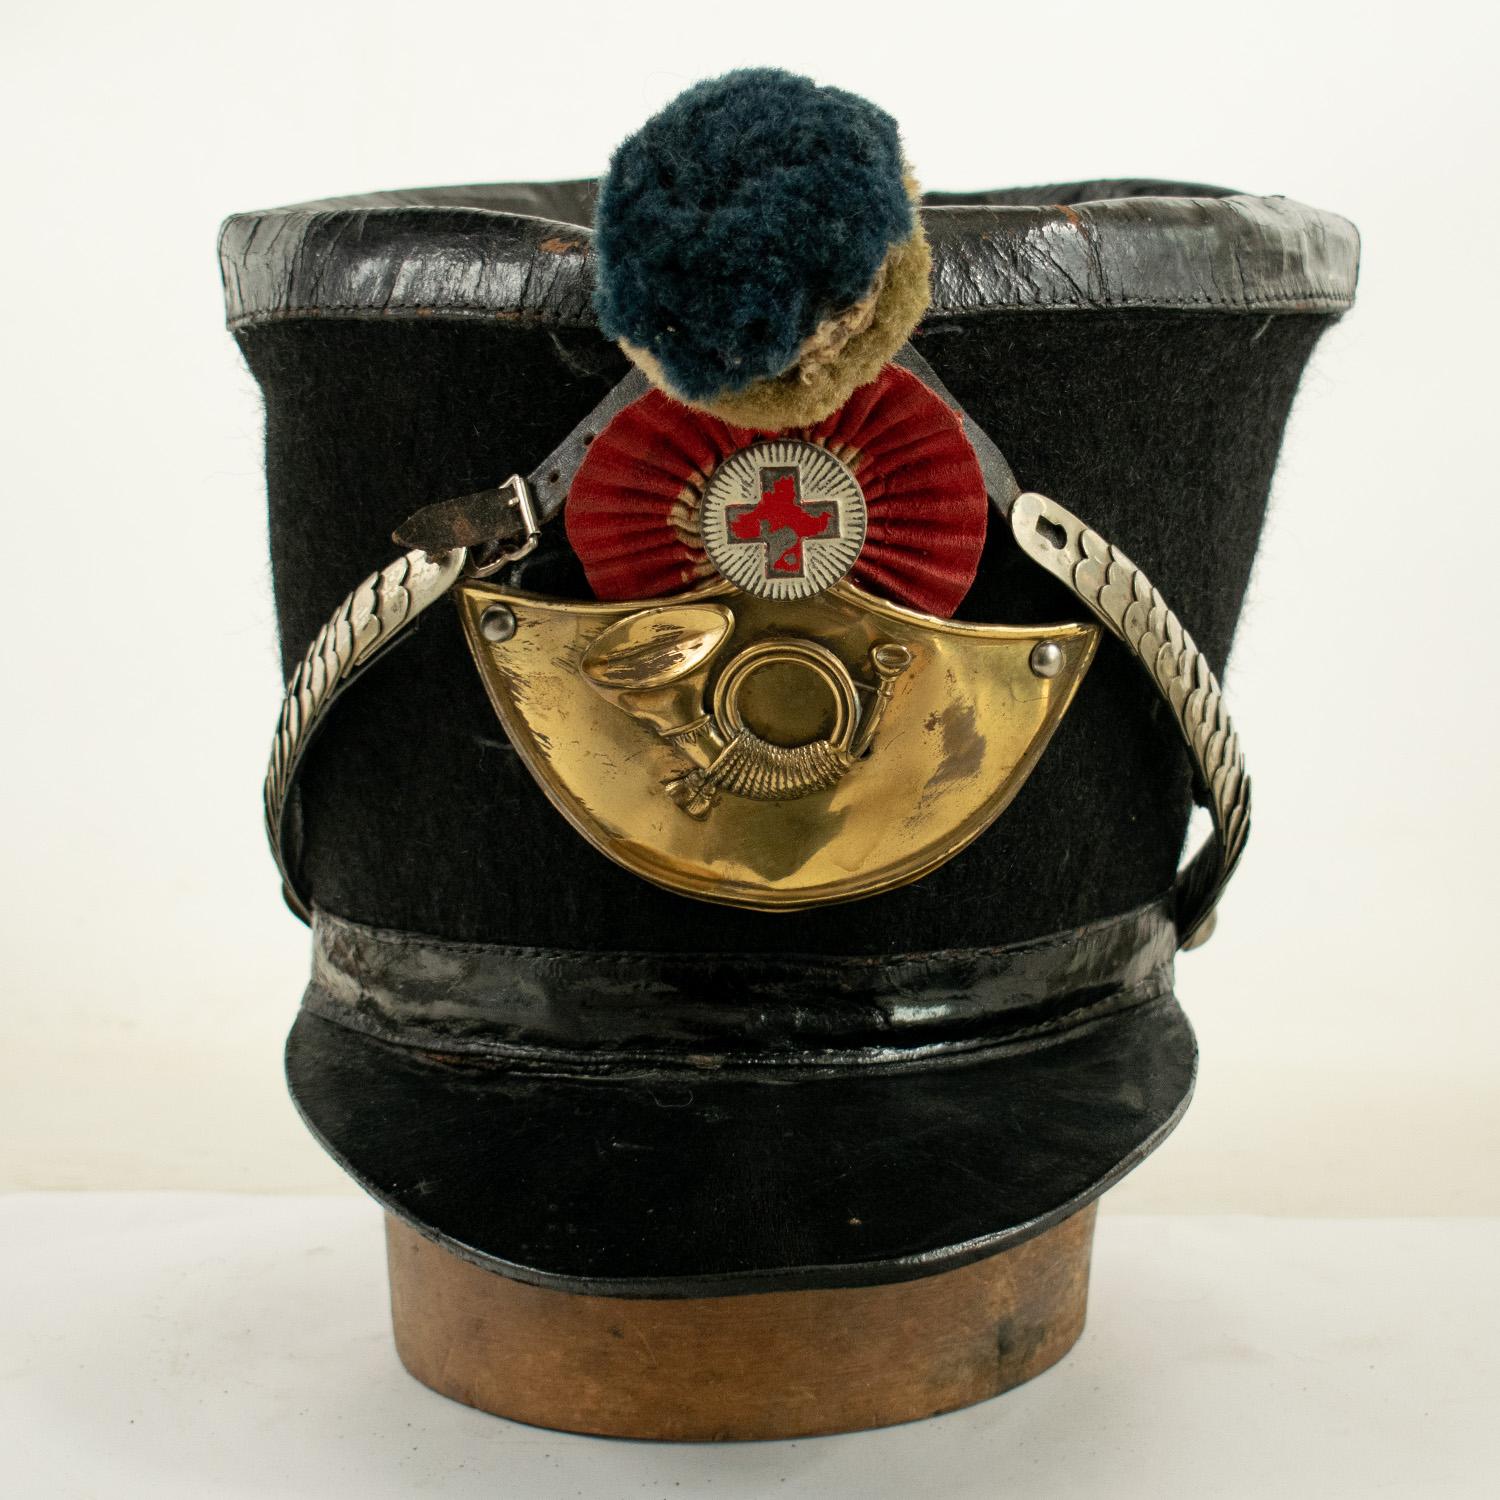 RARE SWISS MODEL 1830 BELL TOP SHAKO TO A JAGER REGIMENT 

Constructed of felt body with solid leather peak, band and top (misshaped), white metal chin scales , red cockade with Swiss devise of red cross on a white background, brass plate with